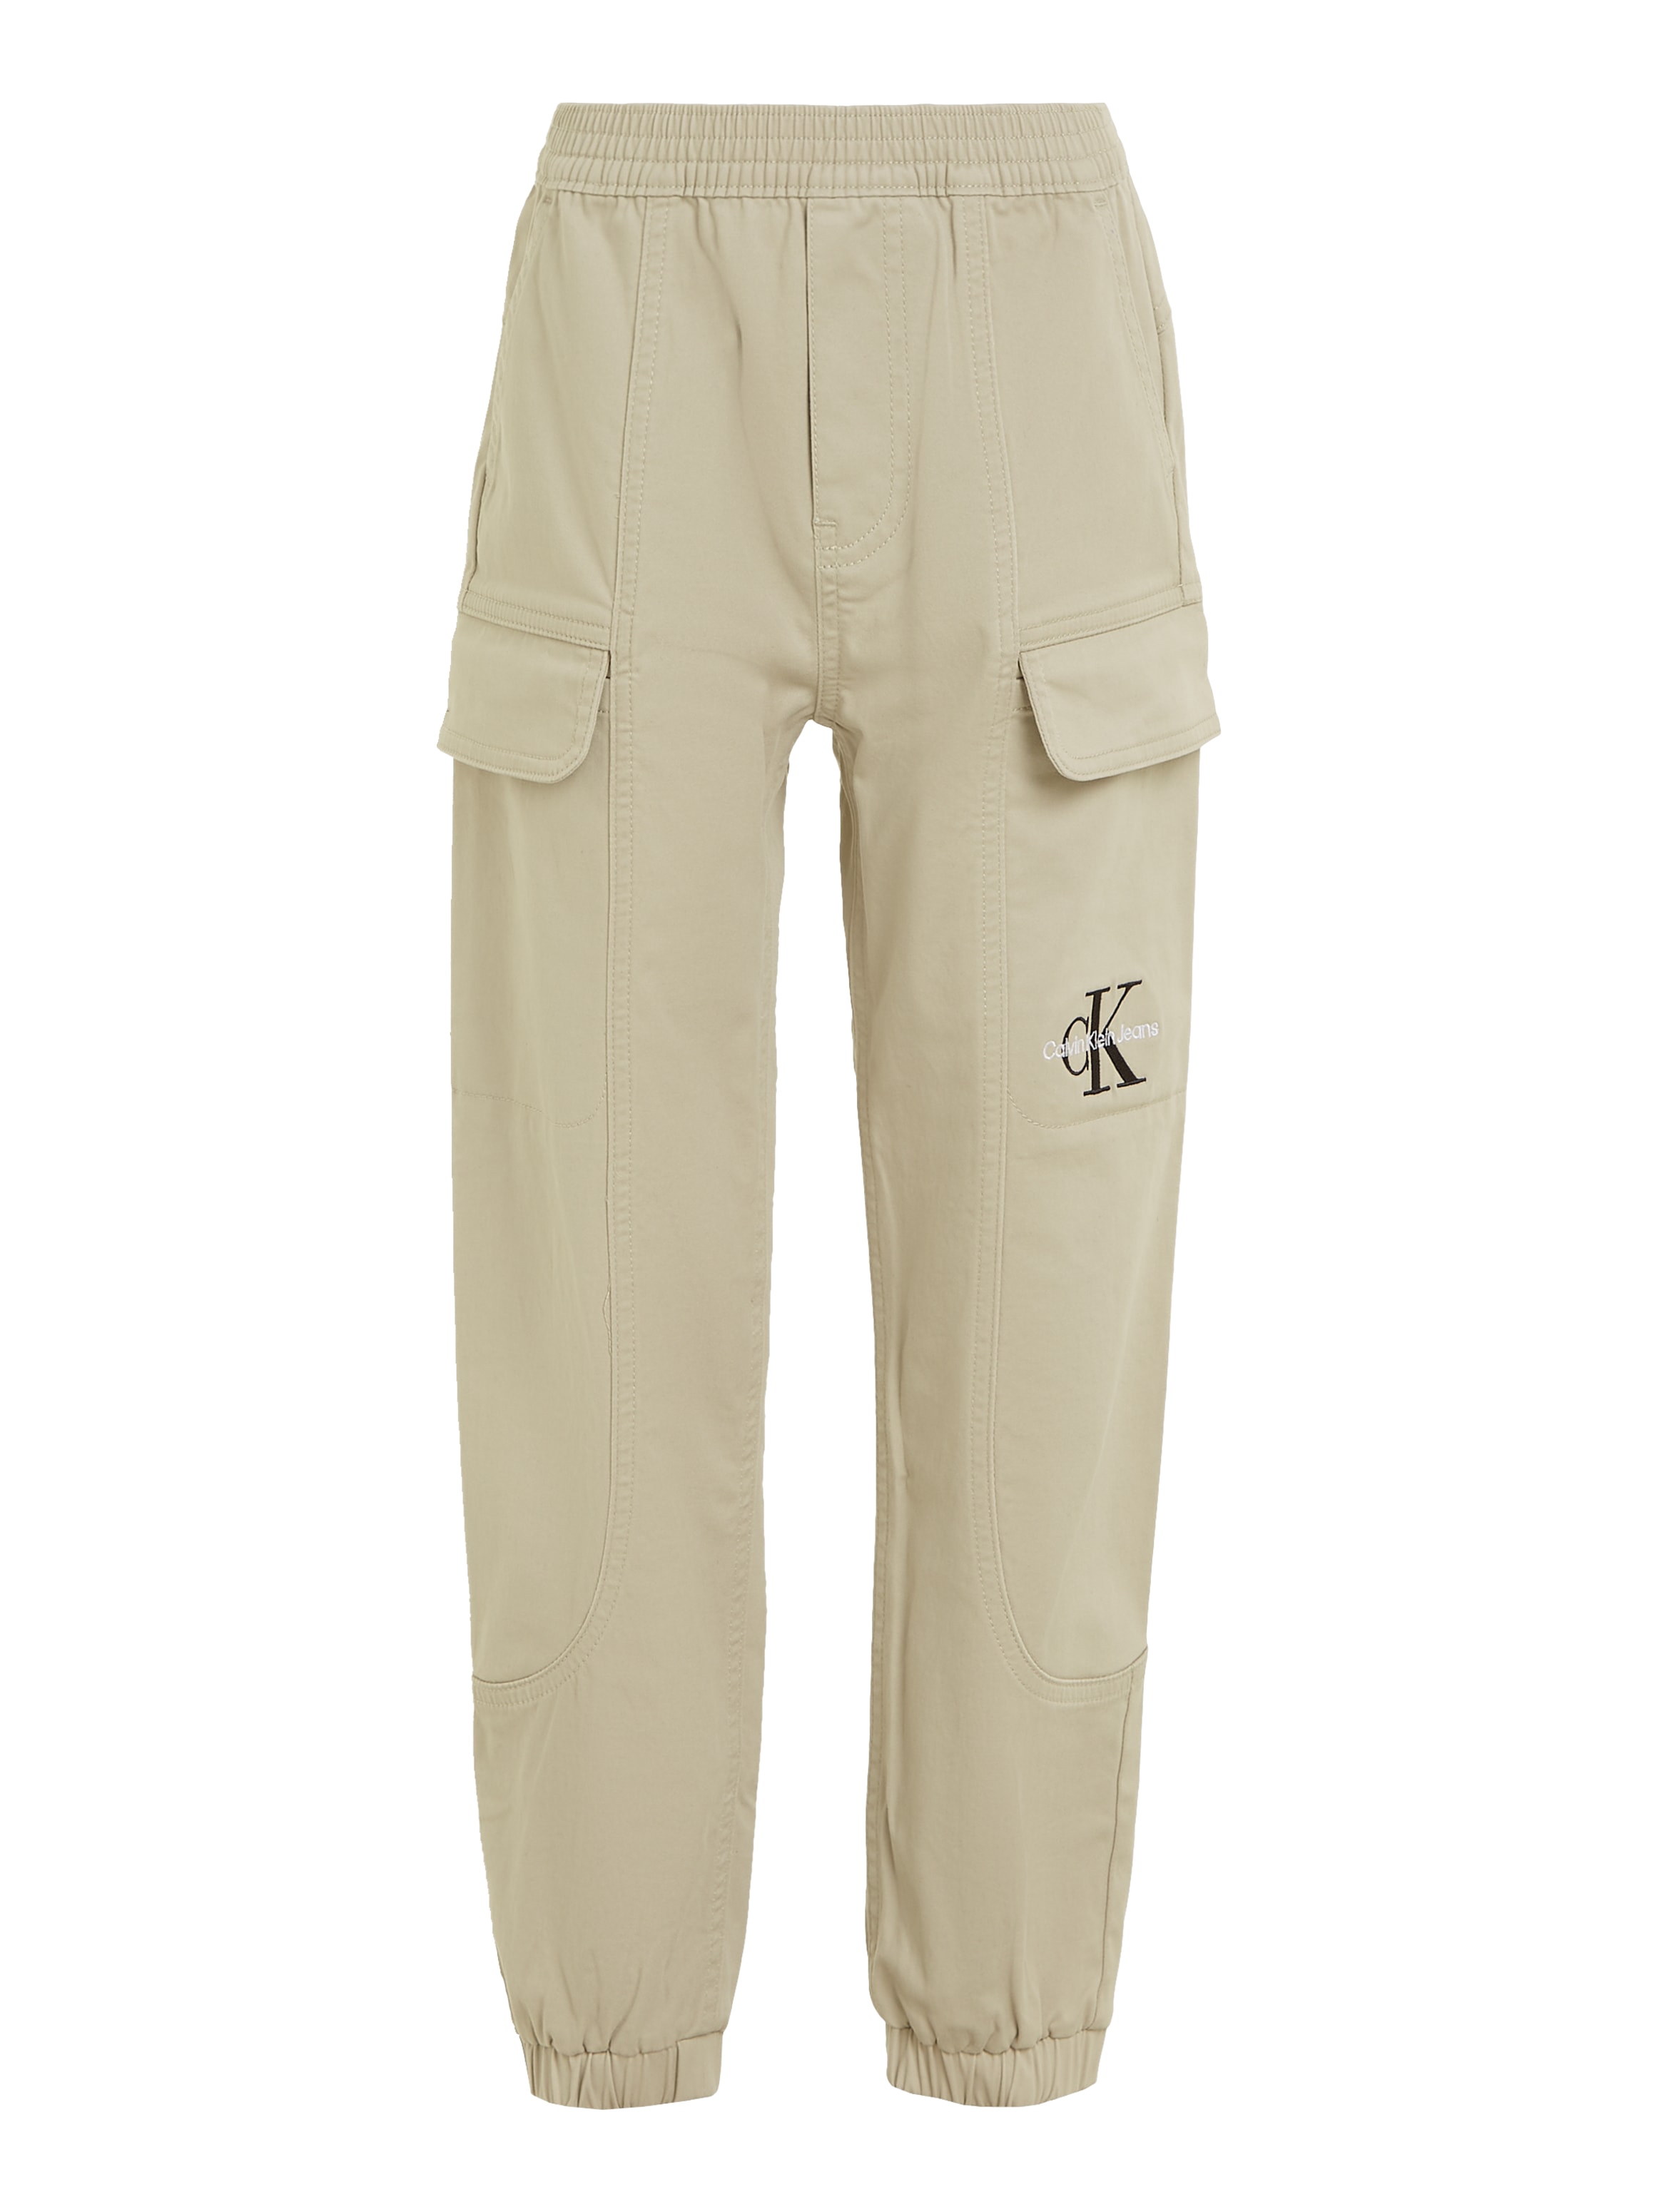 Calvin Klein Jeans SATEEN PANTS - Cargo trousers - plaza taupe